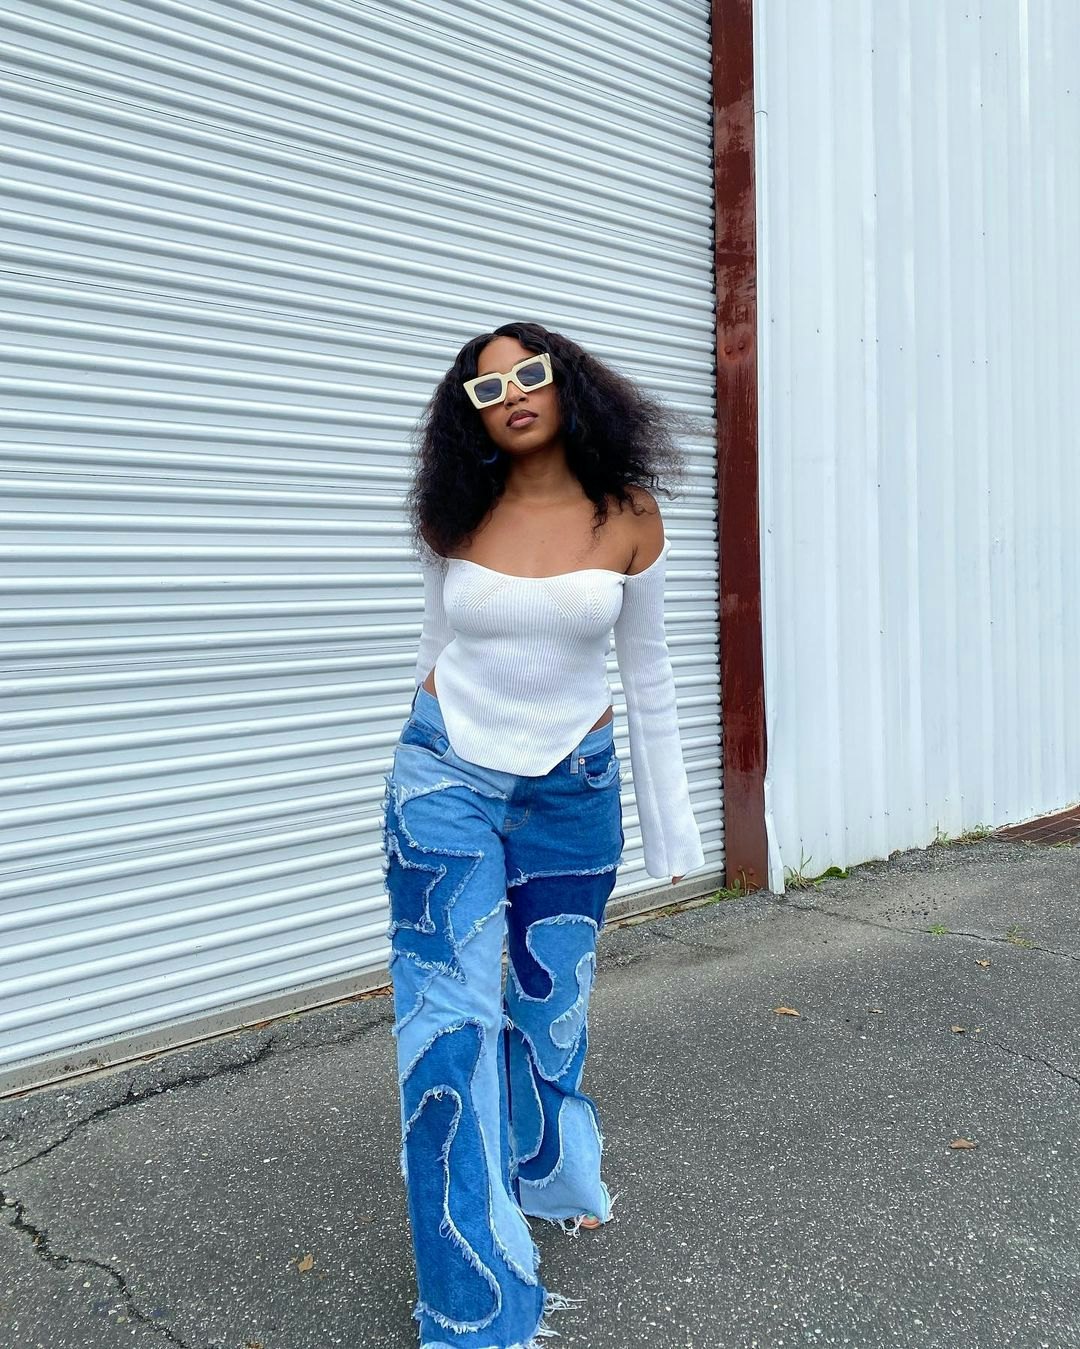 Going-Out Tops & Baggy Jeans Is The Latest Outfit Formula To Try